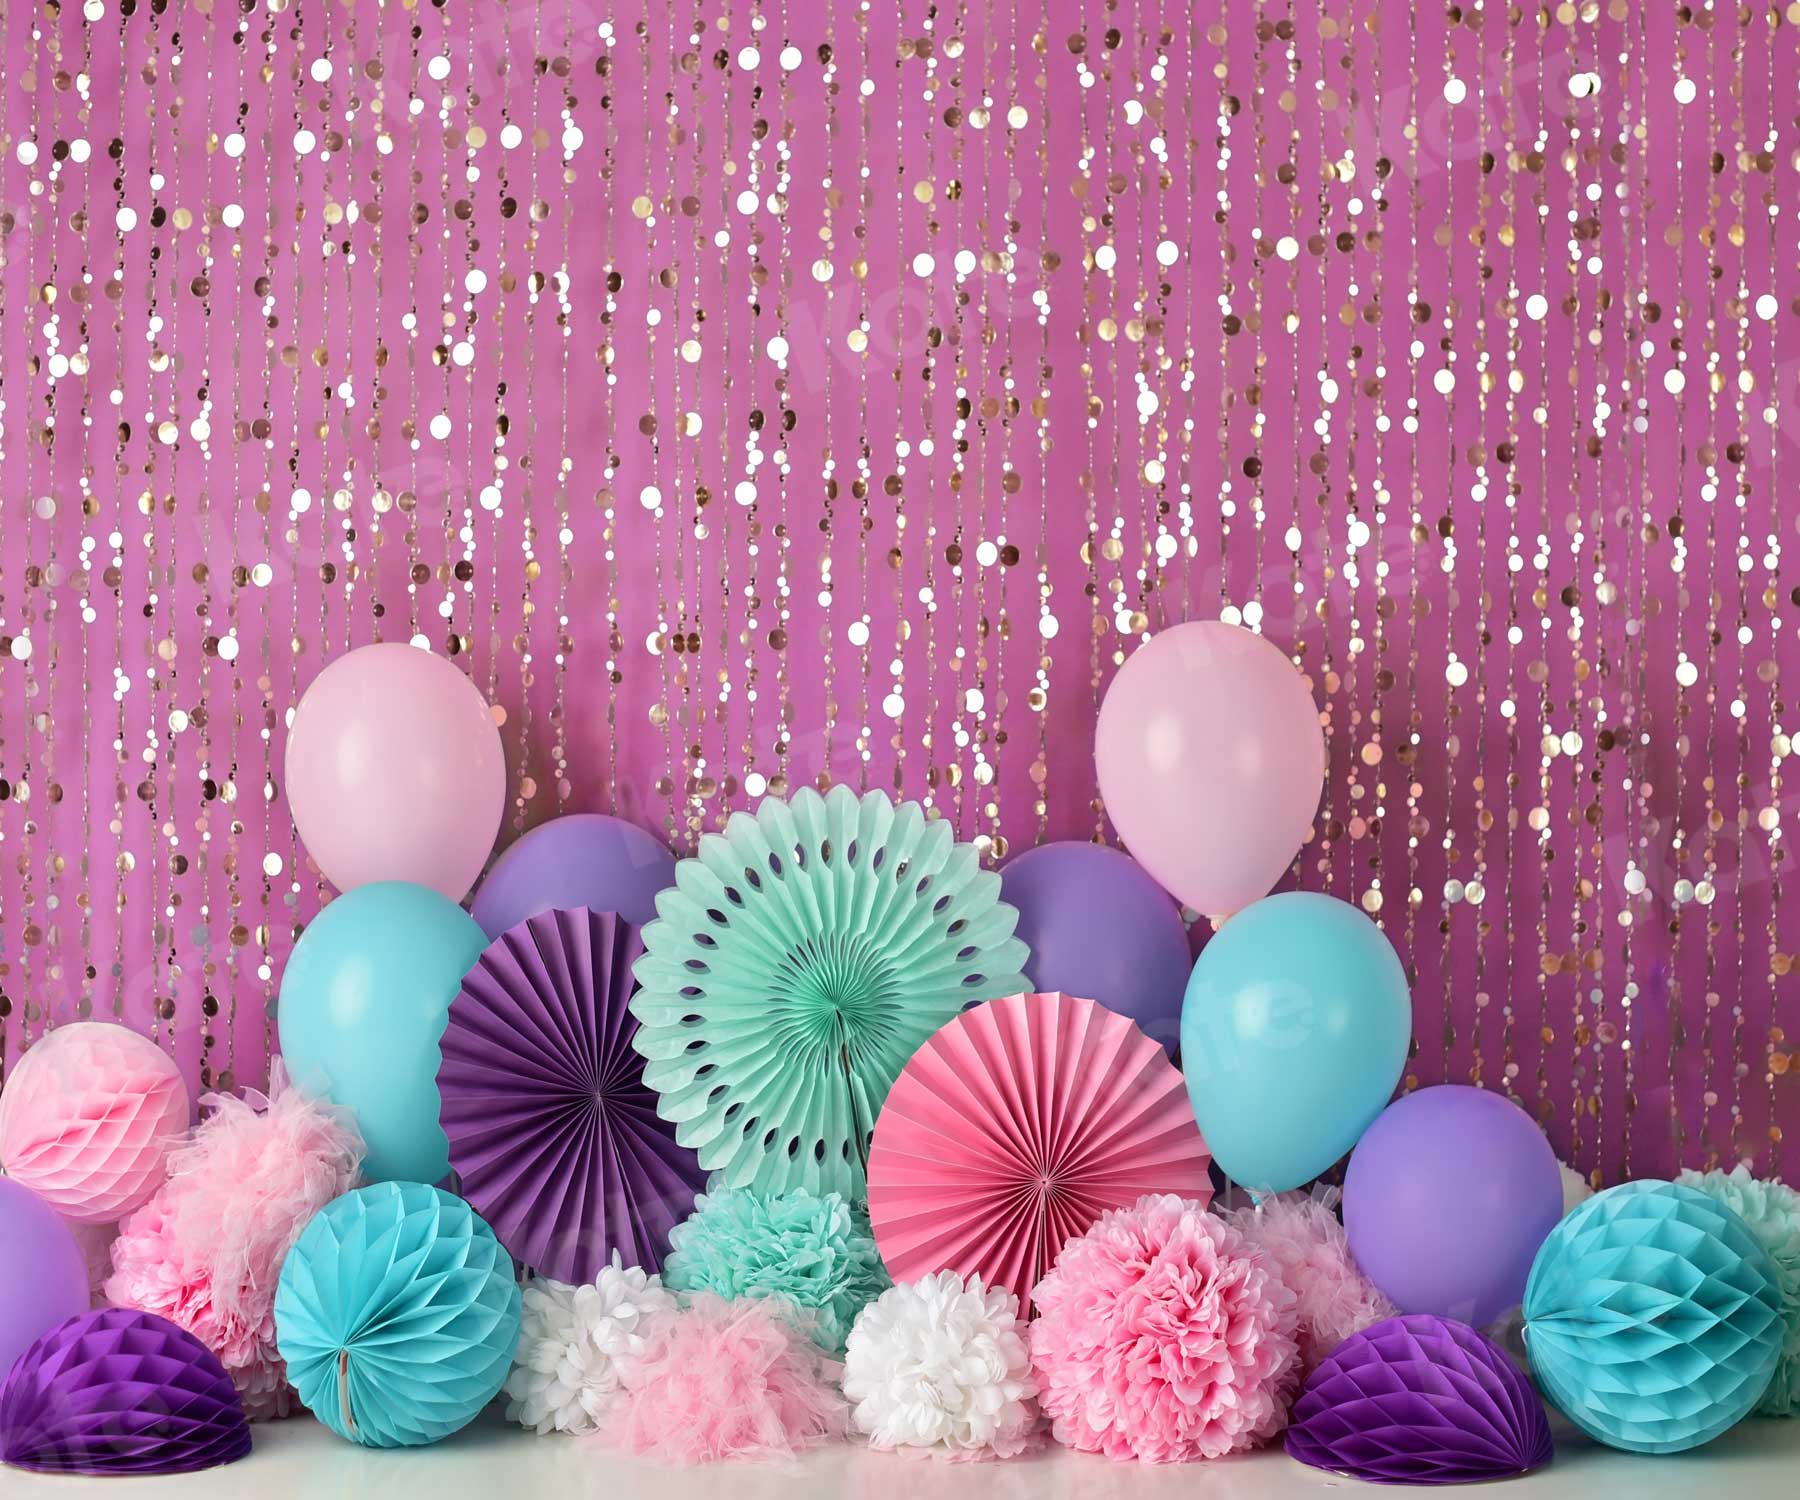 Kate Pink Purple and Teal Birthday Backdrop Designed by Mandy Ringe Photography